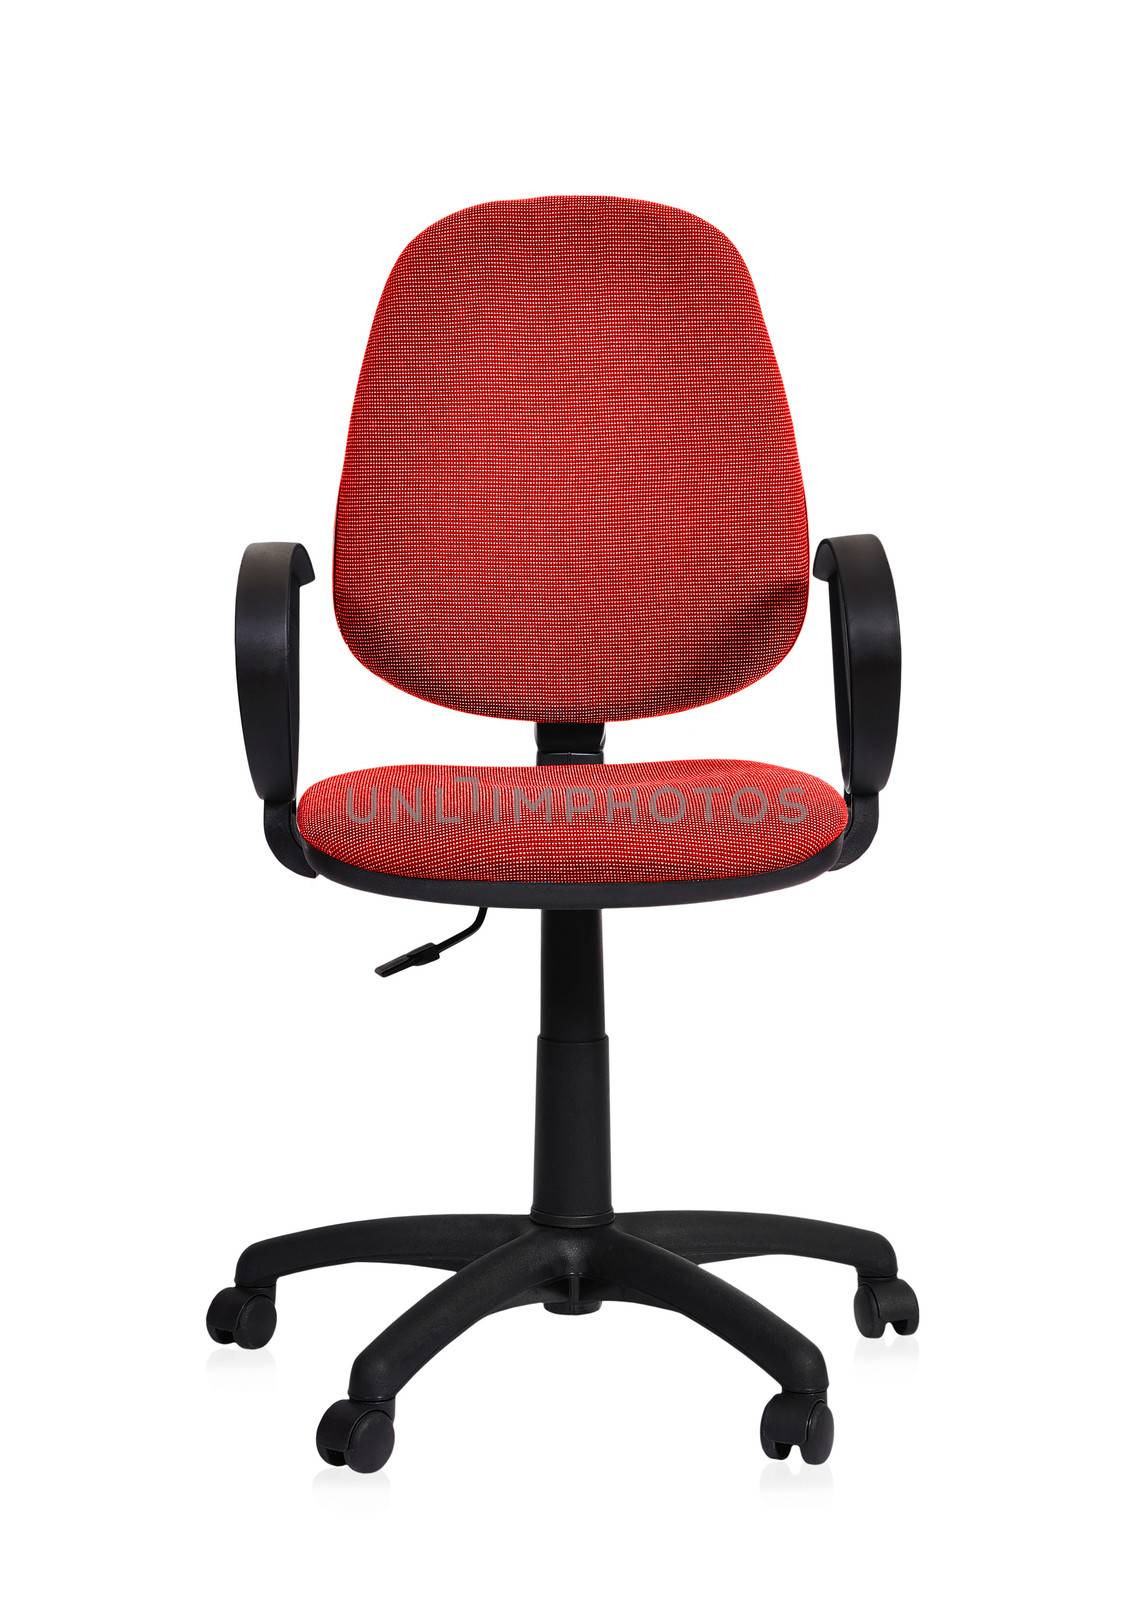 red office chair on white background